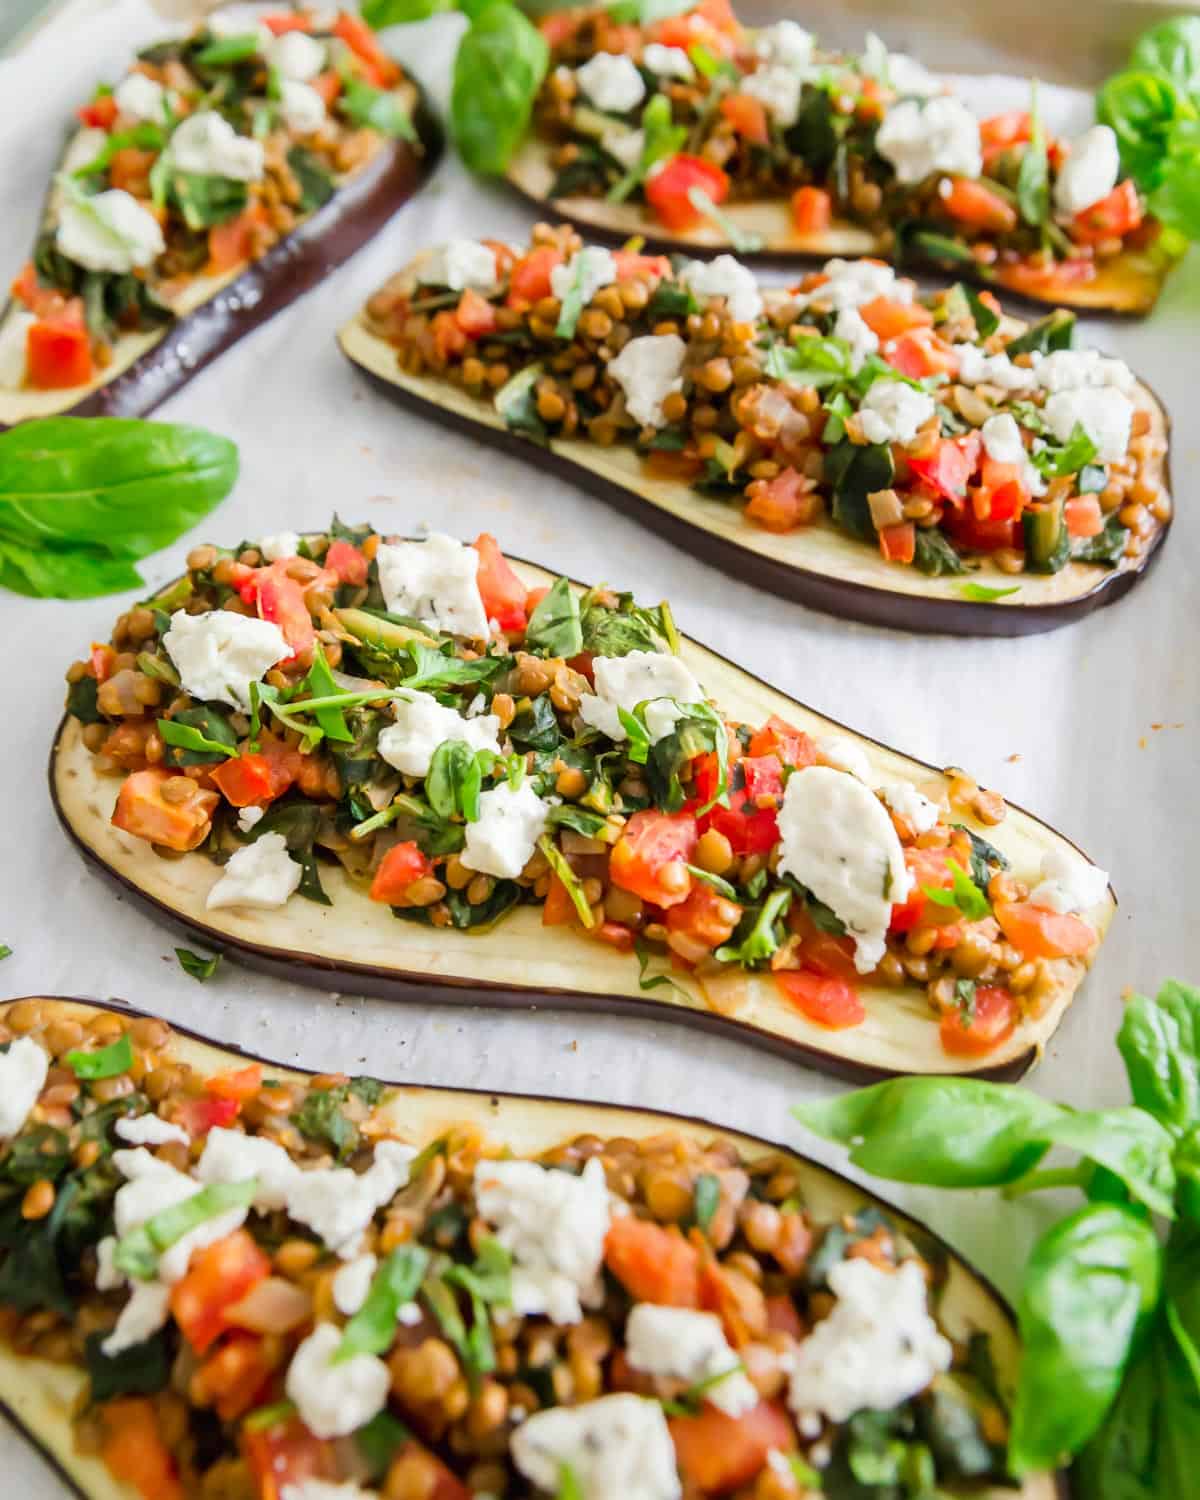 This lentil stuffed eggplant recipe is a hearty summery vegetarian meal. 